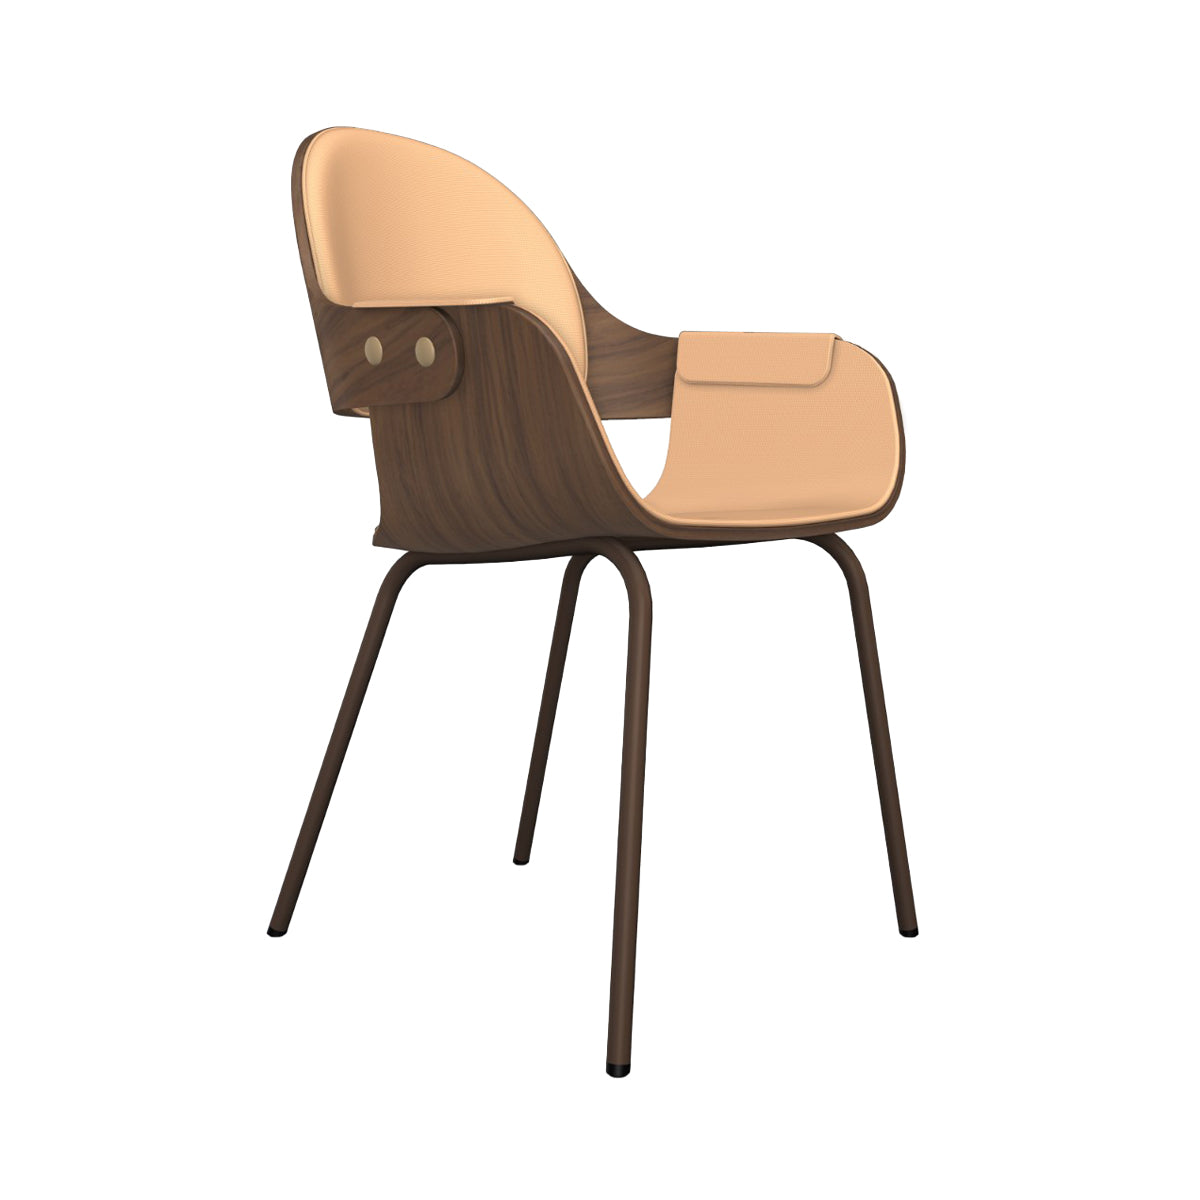 Showtime Nude Chair with Metal Base: Interior Seat + Armrest + Backrest Cushion + Walnut + Pale Brown